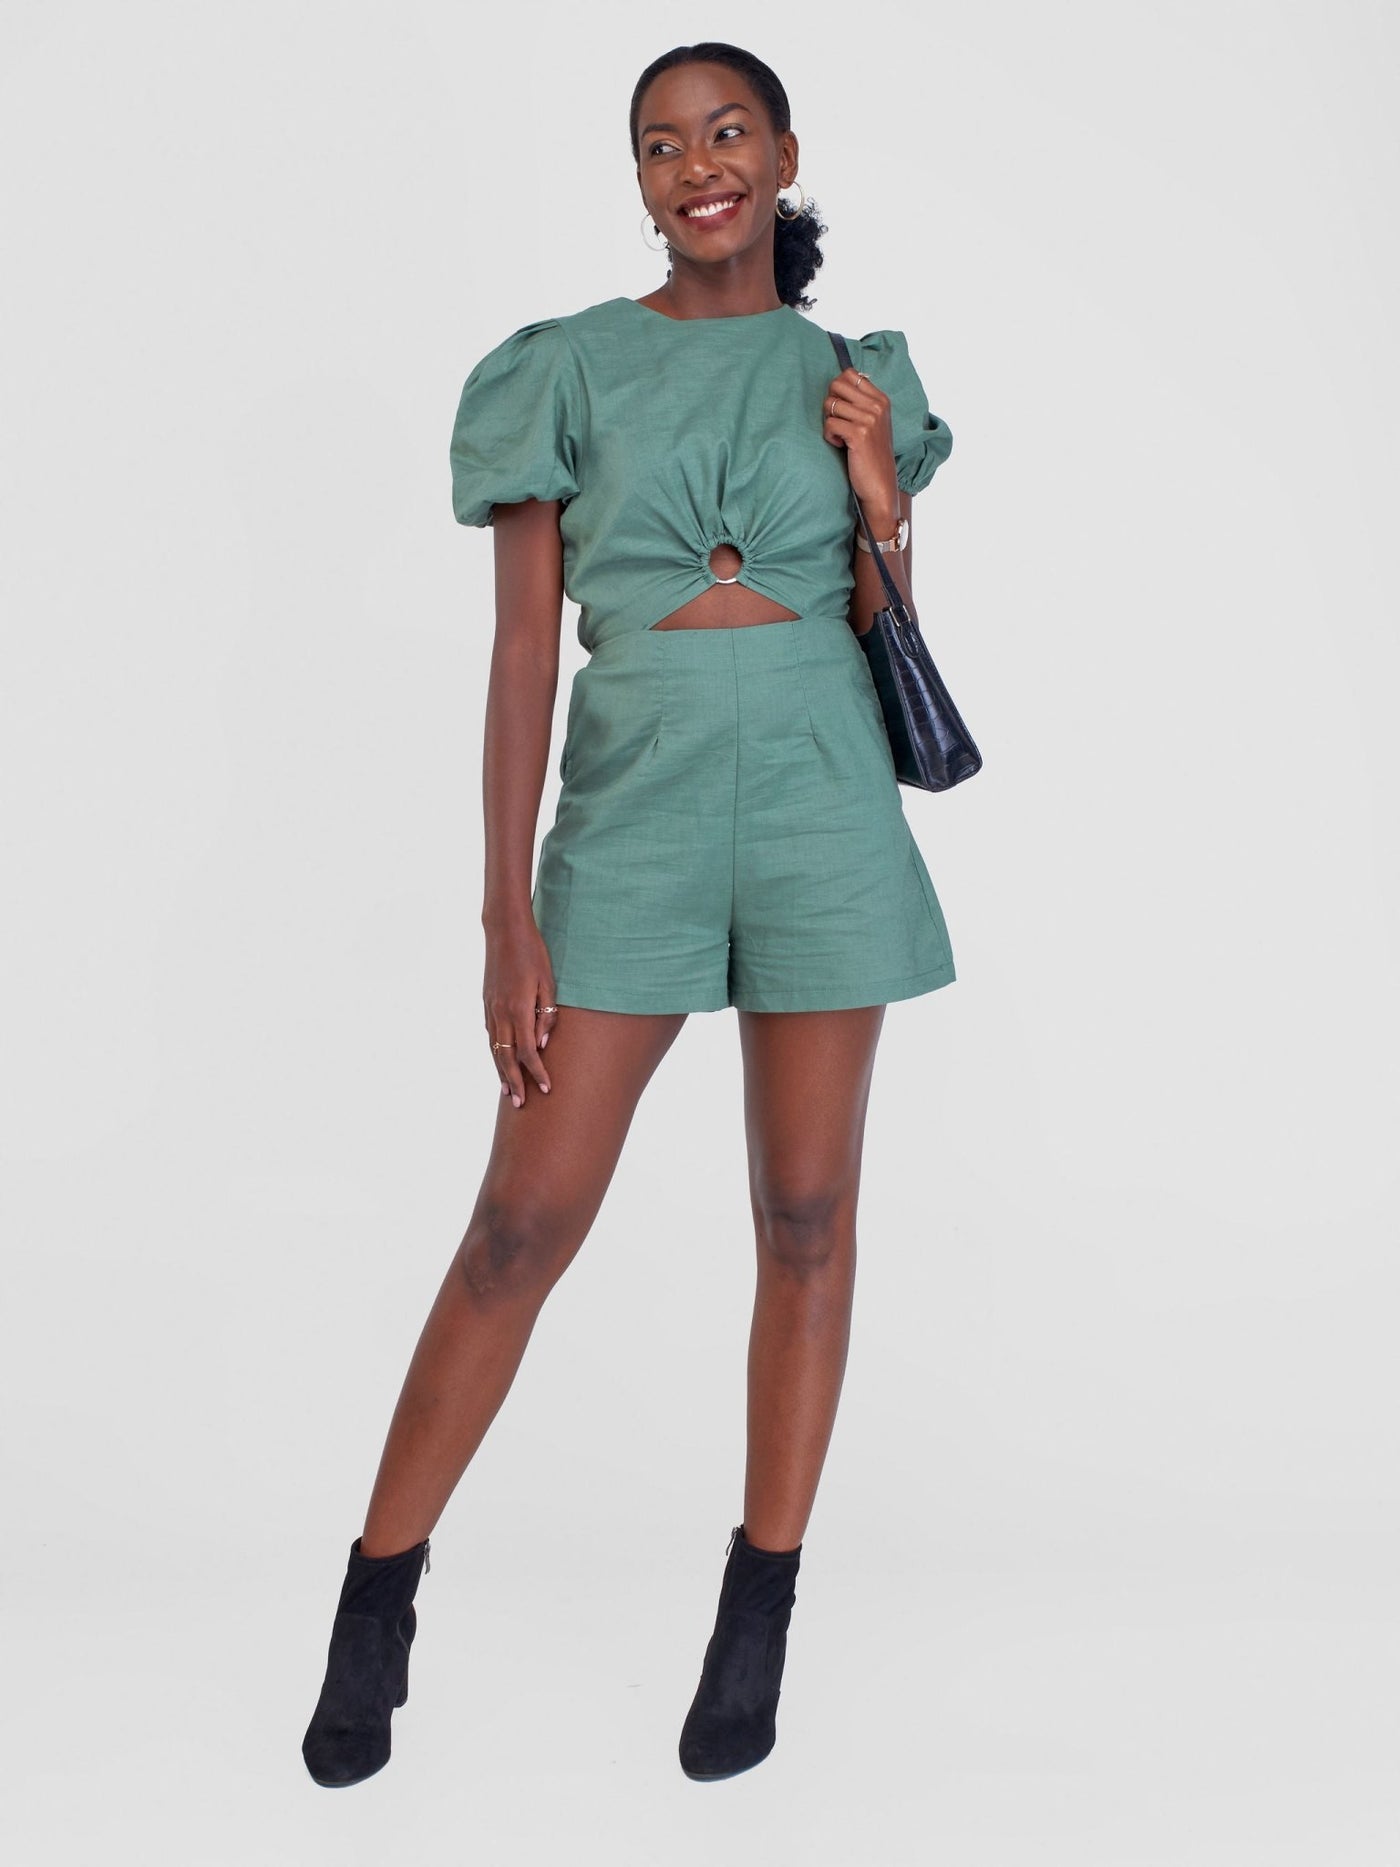 Alara Linen Romper With A Central Metalic Ring And Front Cutout - Olive Green - Shopzetu